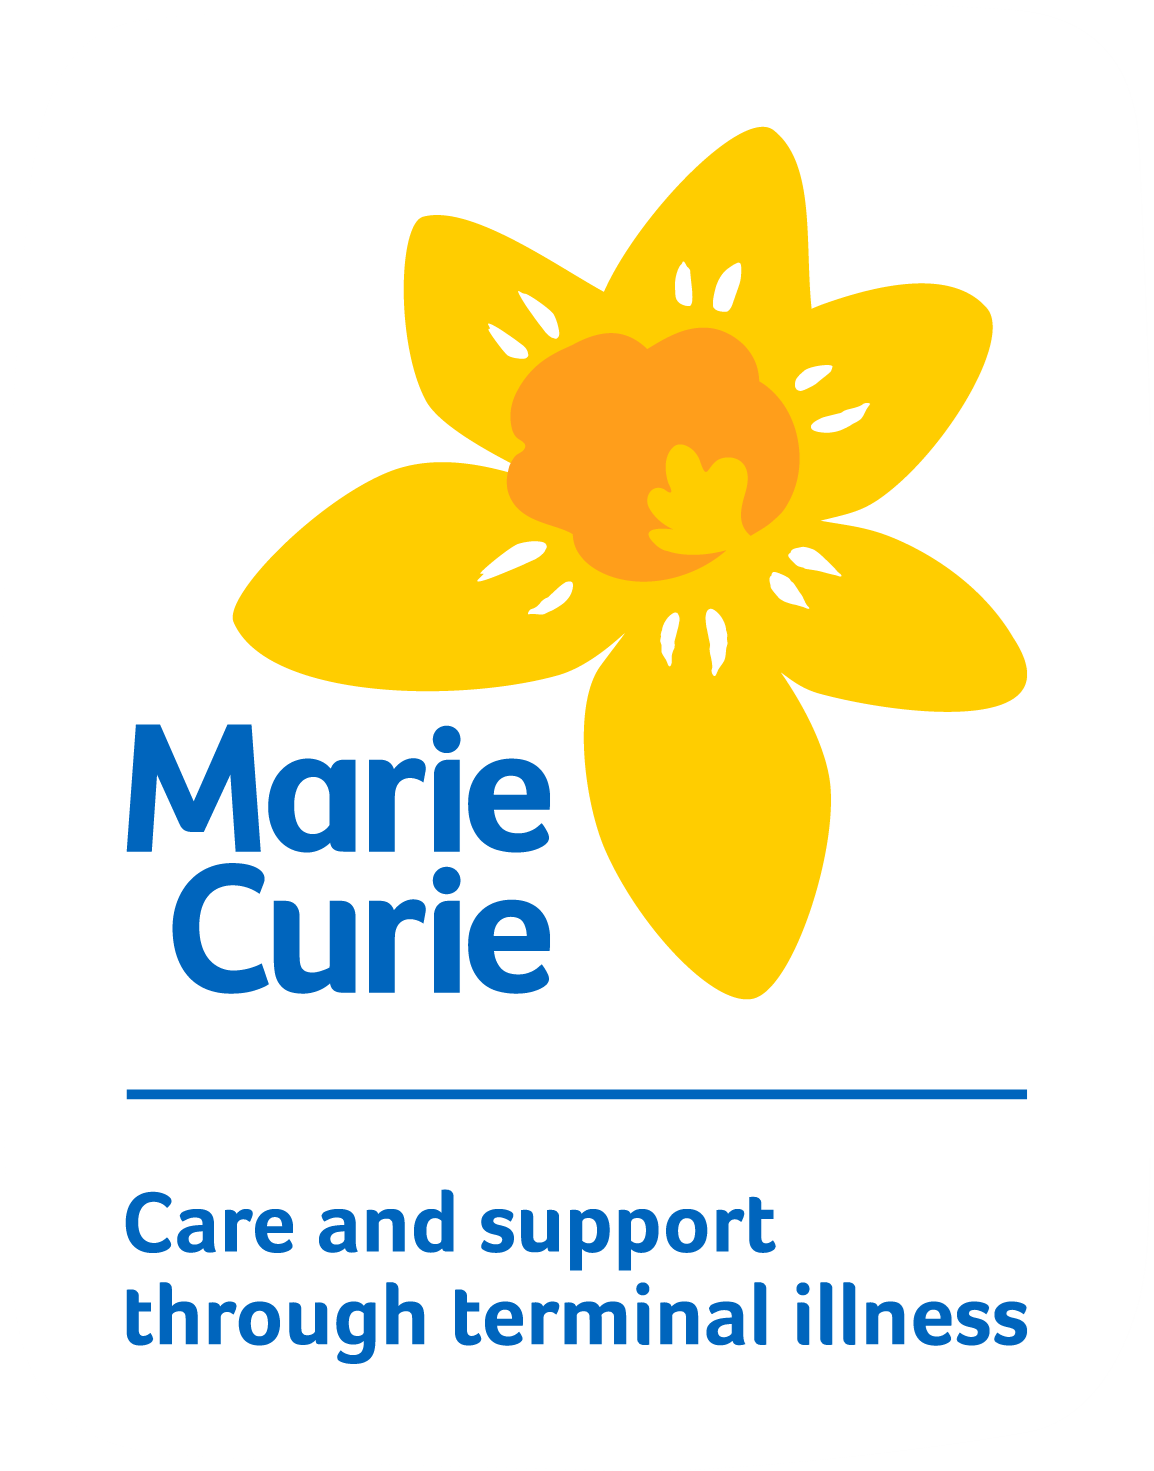 £160.83 raised for ​Marie Curie - ​​23rd February 2018: